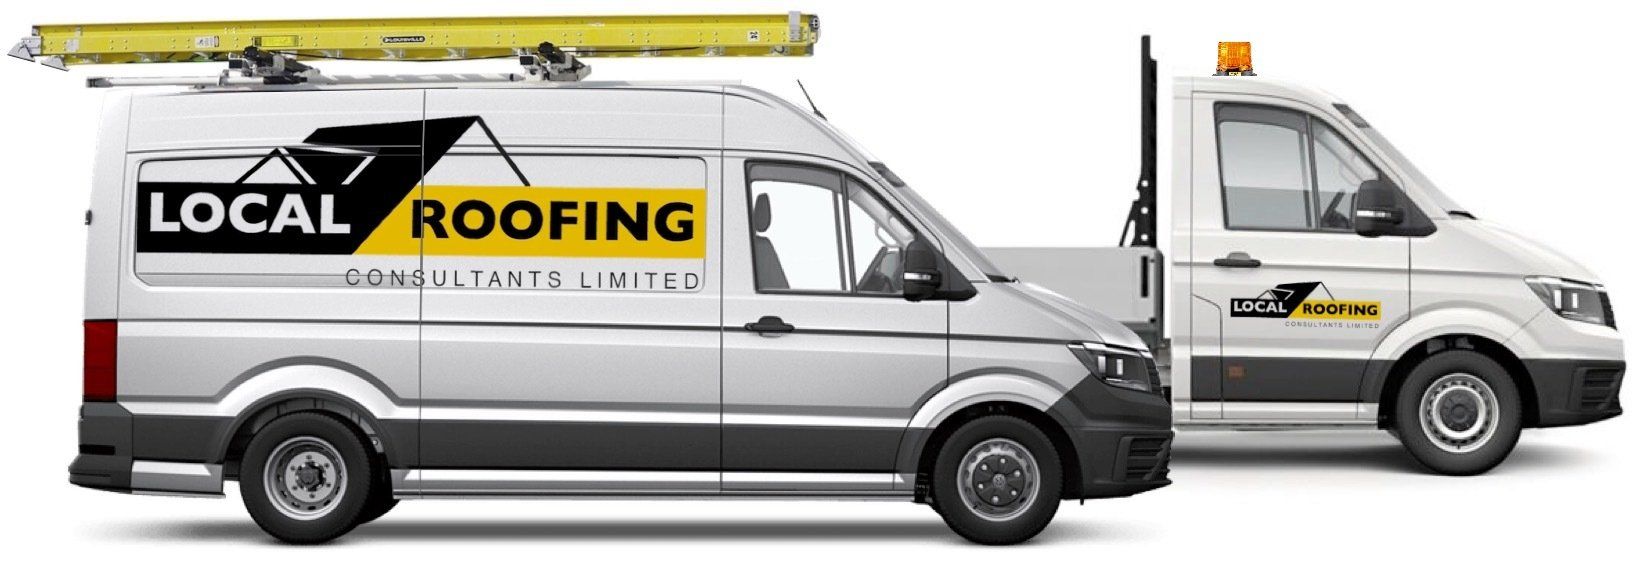 Local Roofing Consultants Limited work in Uxbridge and throughout the London area